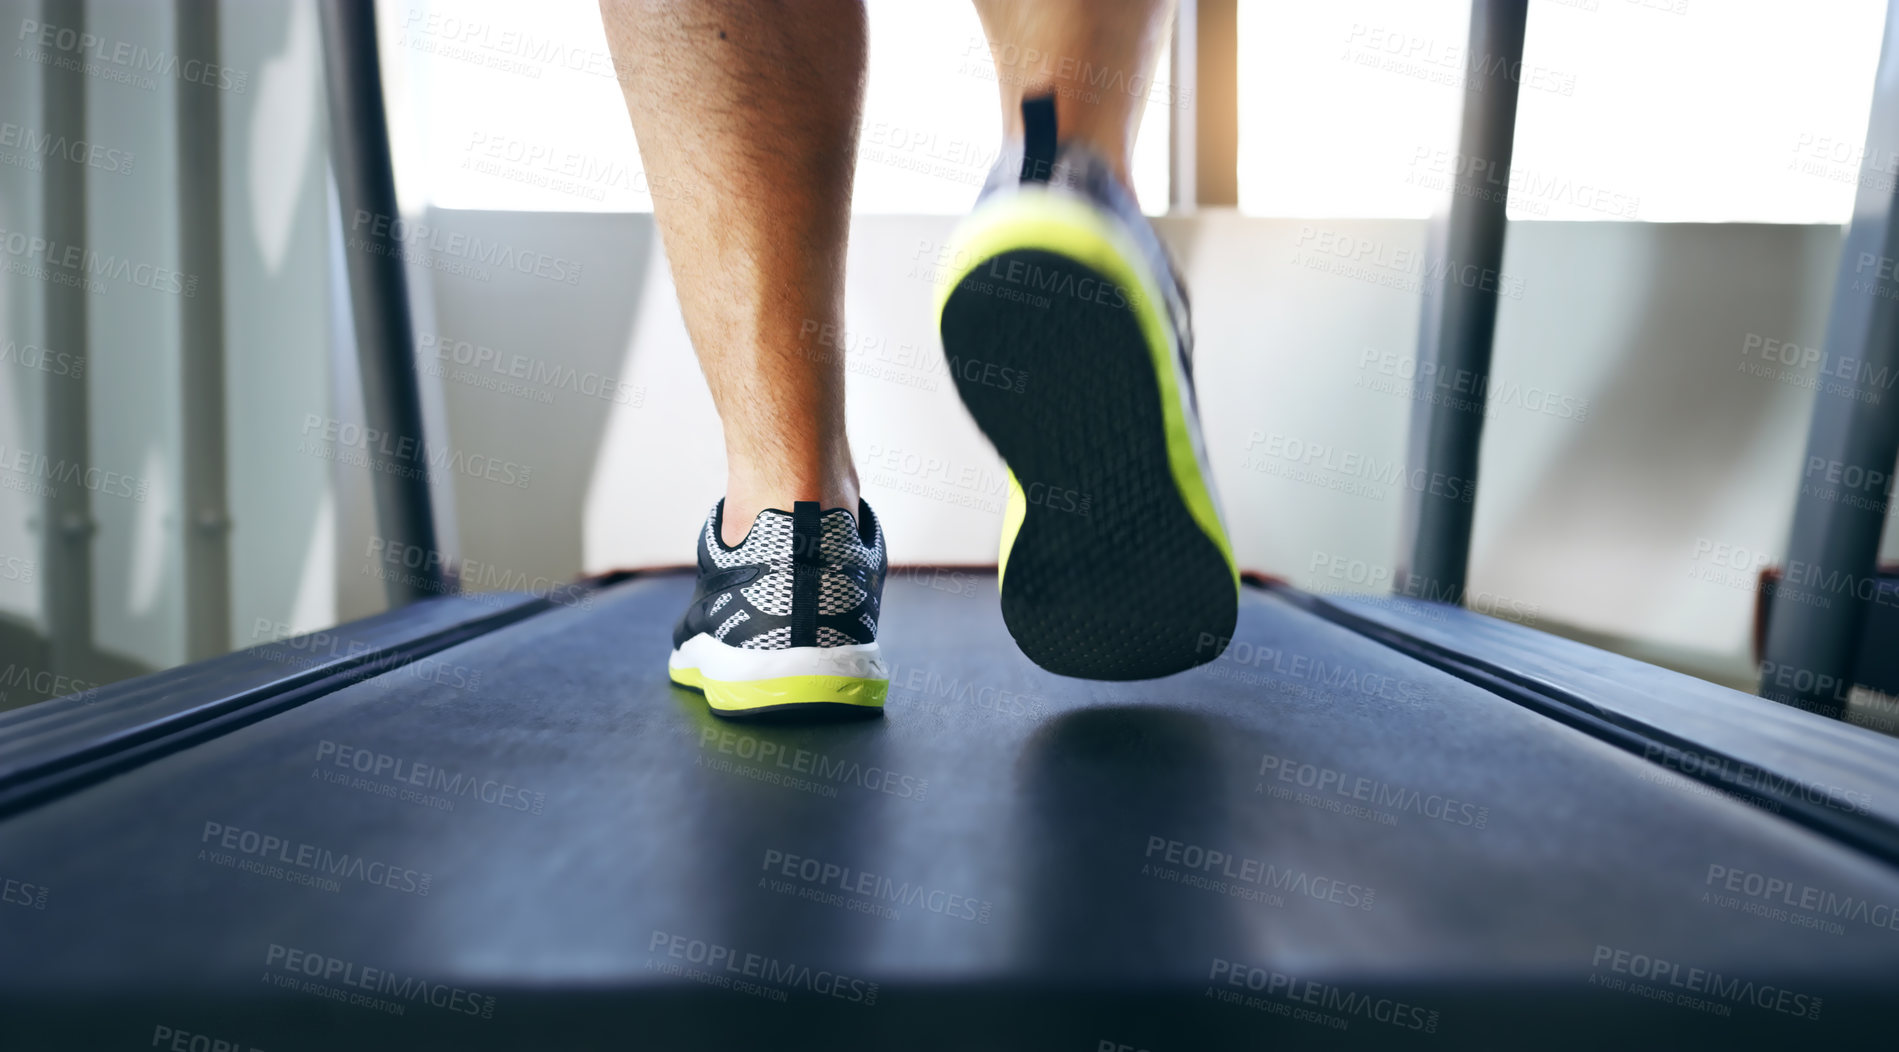 Buy stock photo Cropped shot of an unrecognizable man jogging on a treadmill in the gym